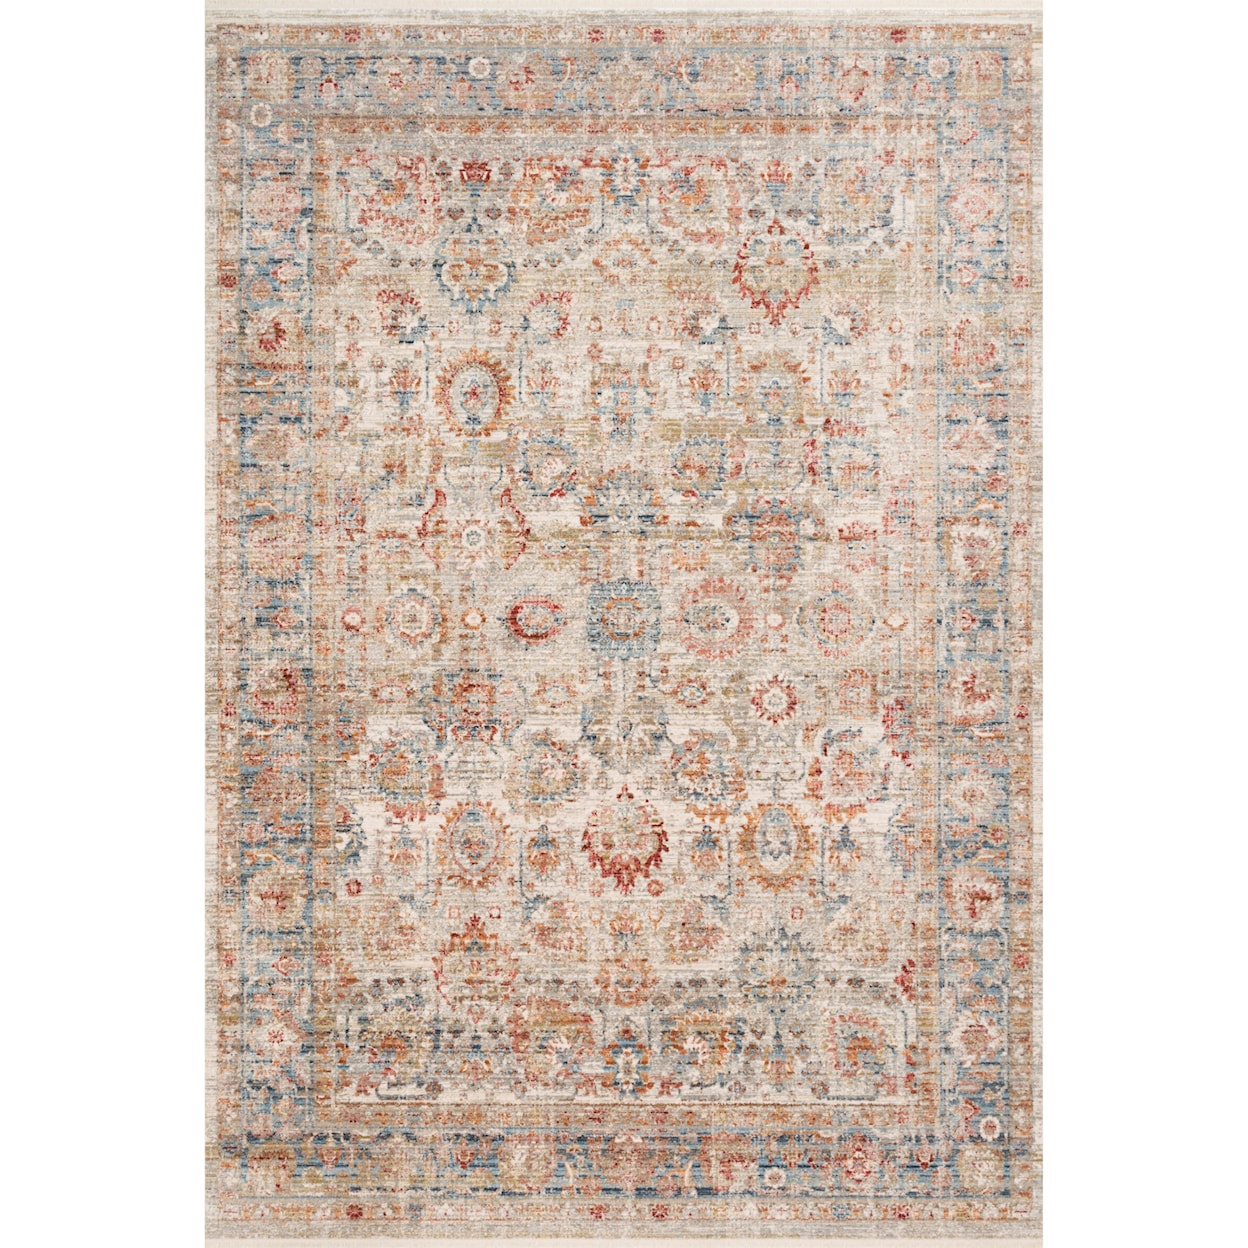 Reeds Rugs Claire 9'6" x 13' Ivory / Ocean Rug